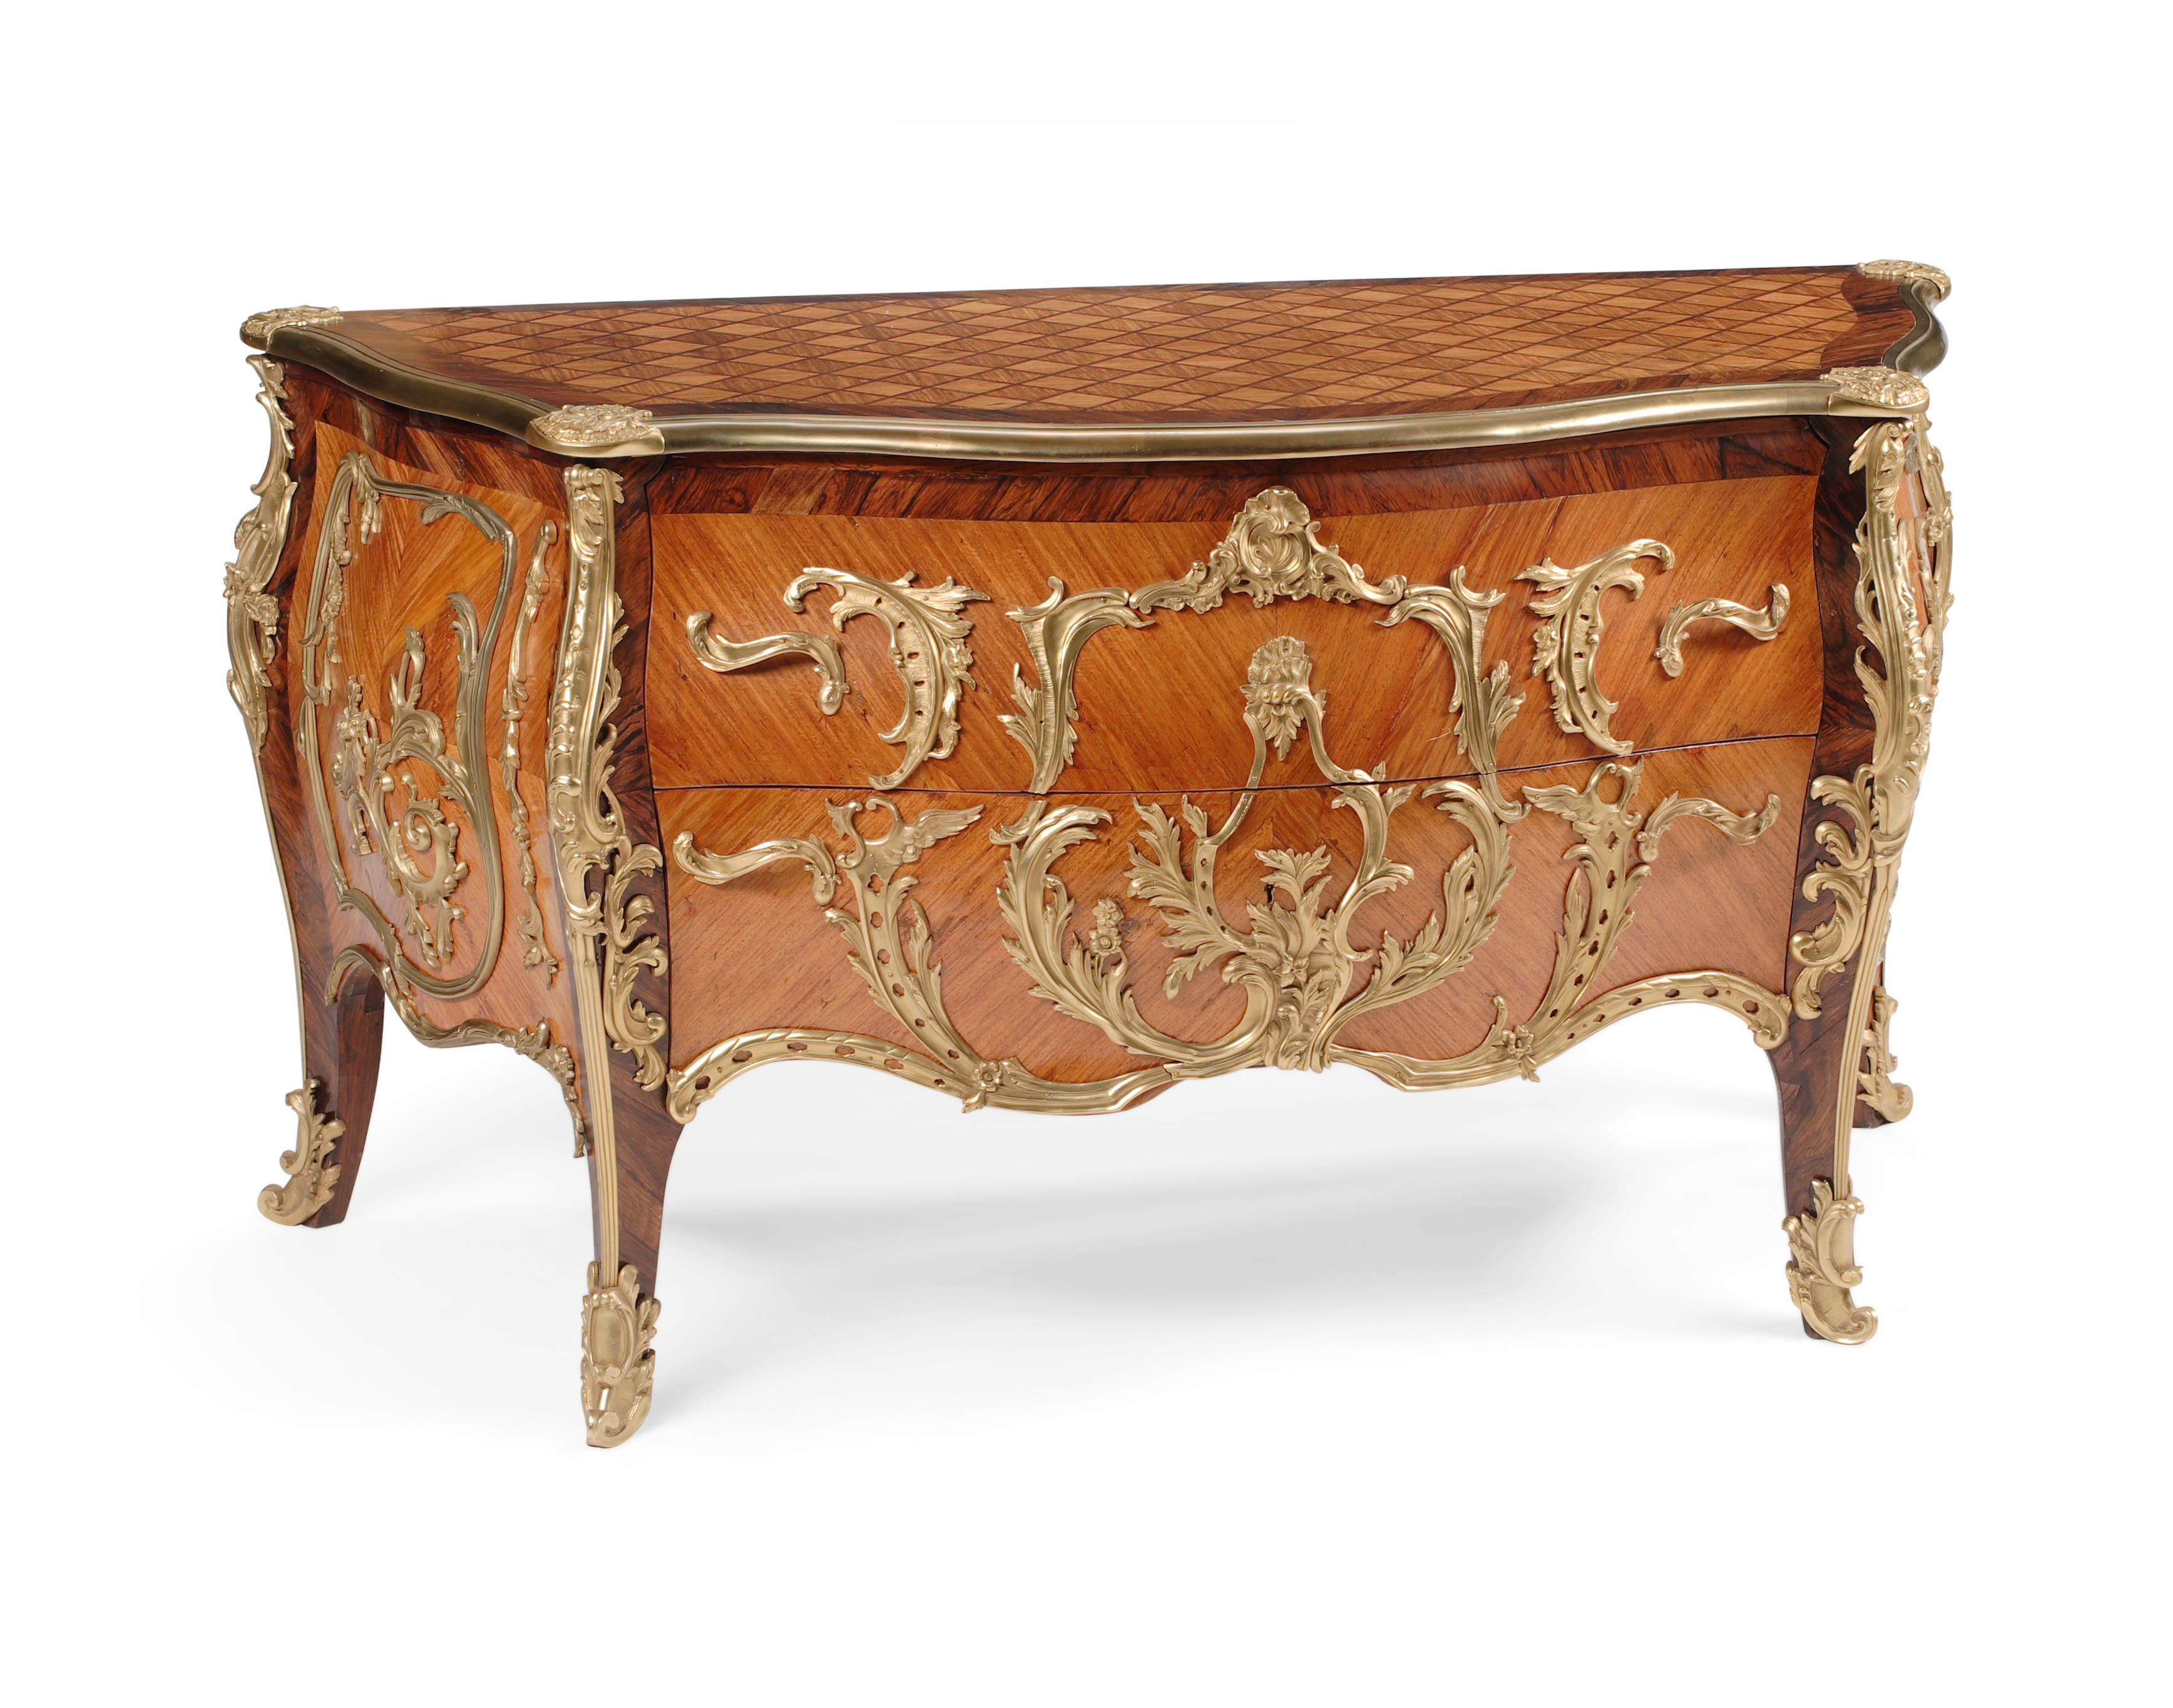 A Fine Louis XV style gilt bronze mounted parquetry bombe commode